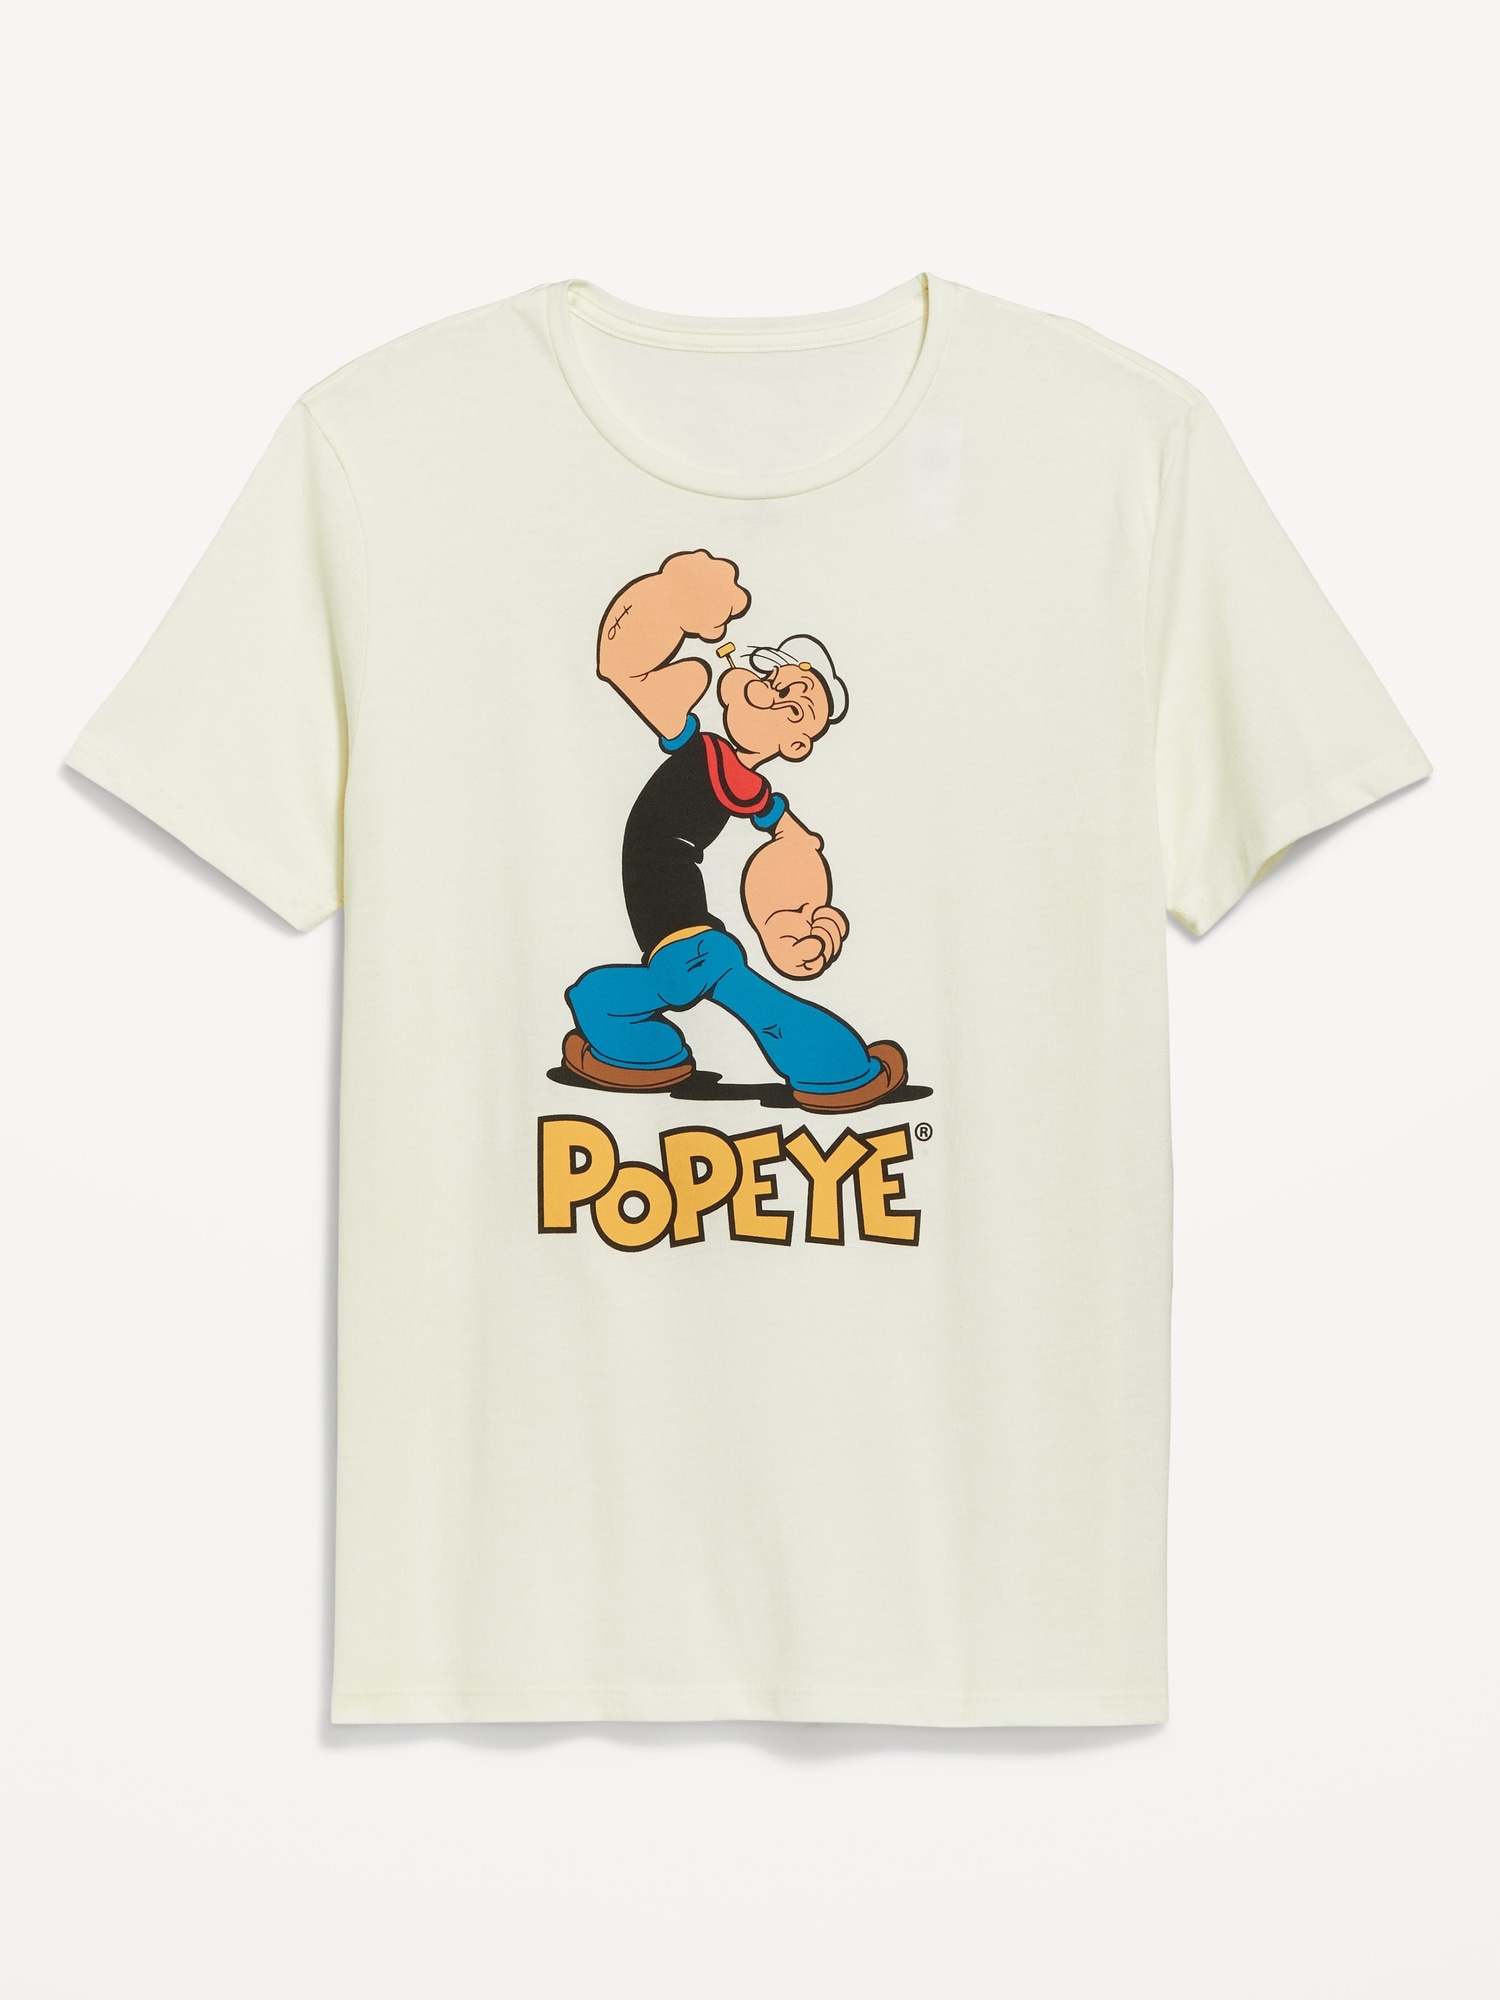 Popeye® Gender-Neutral T-Shirt for Adults